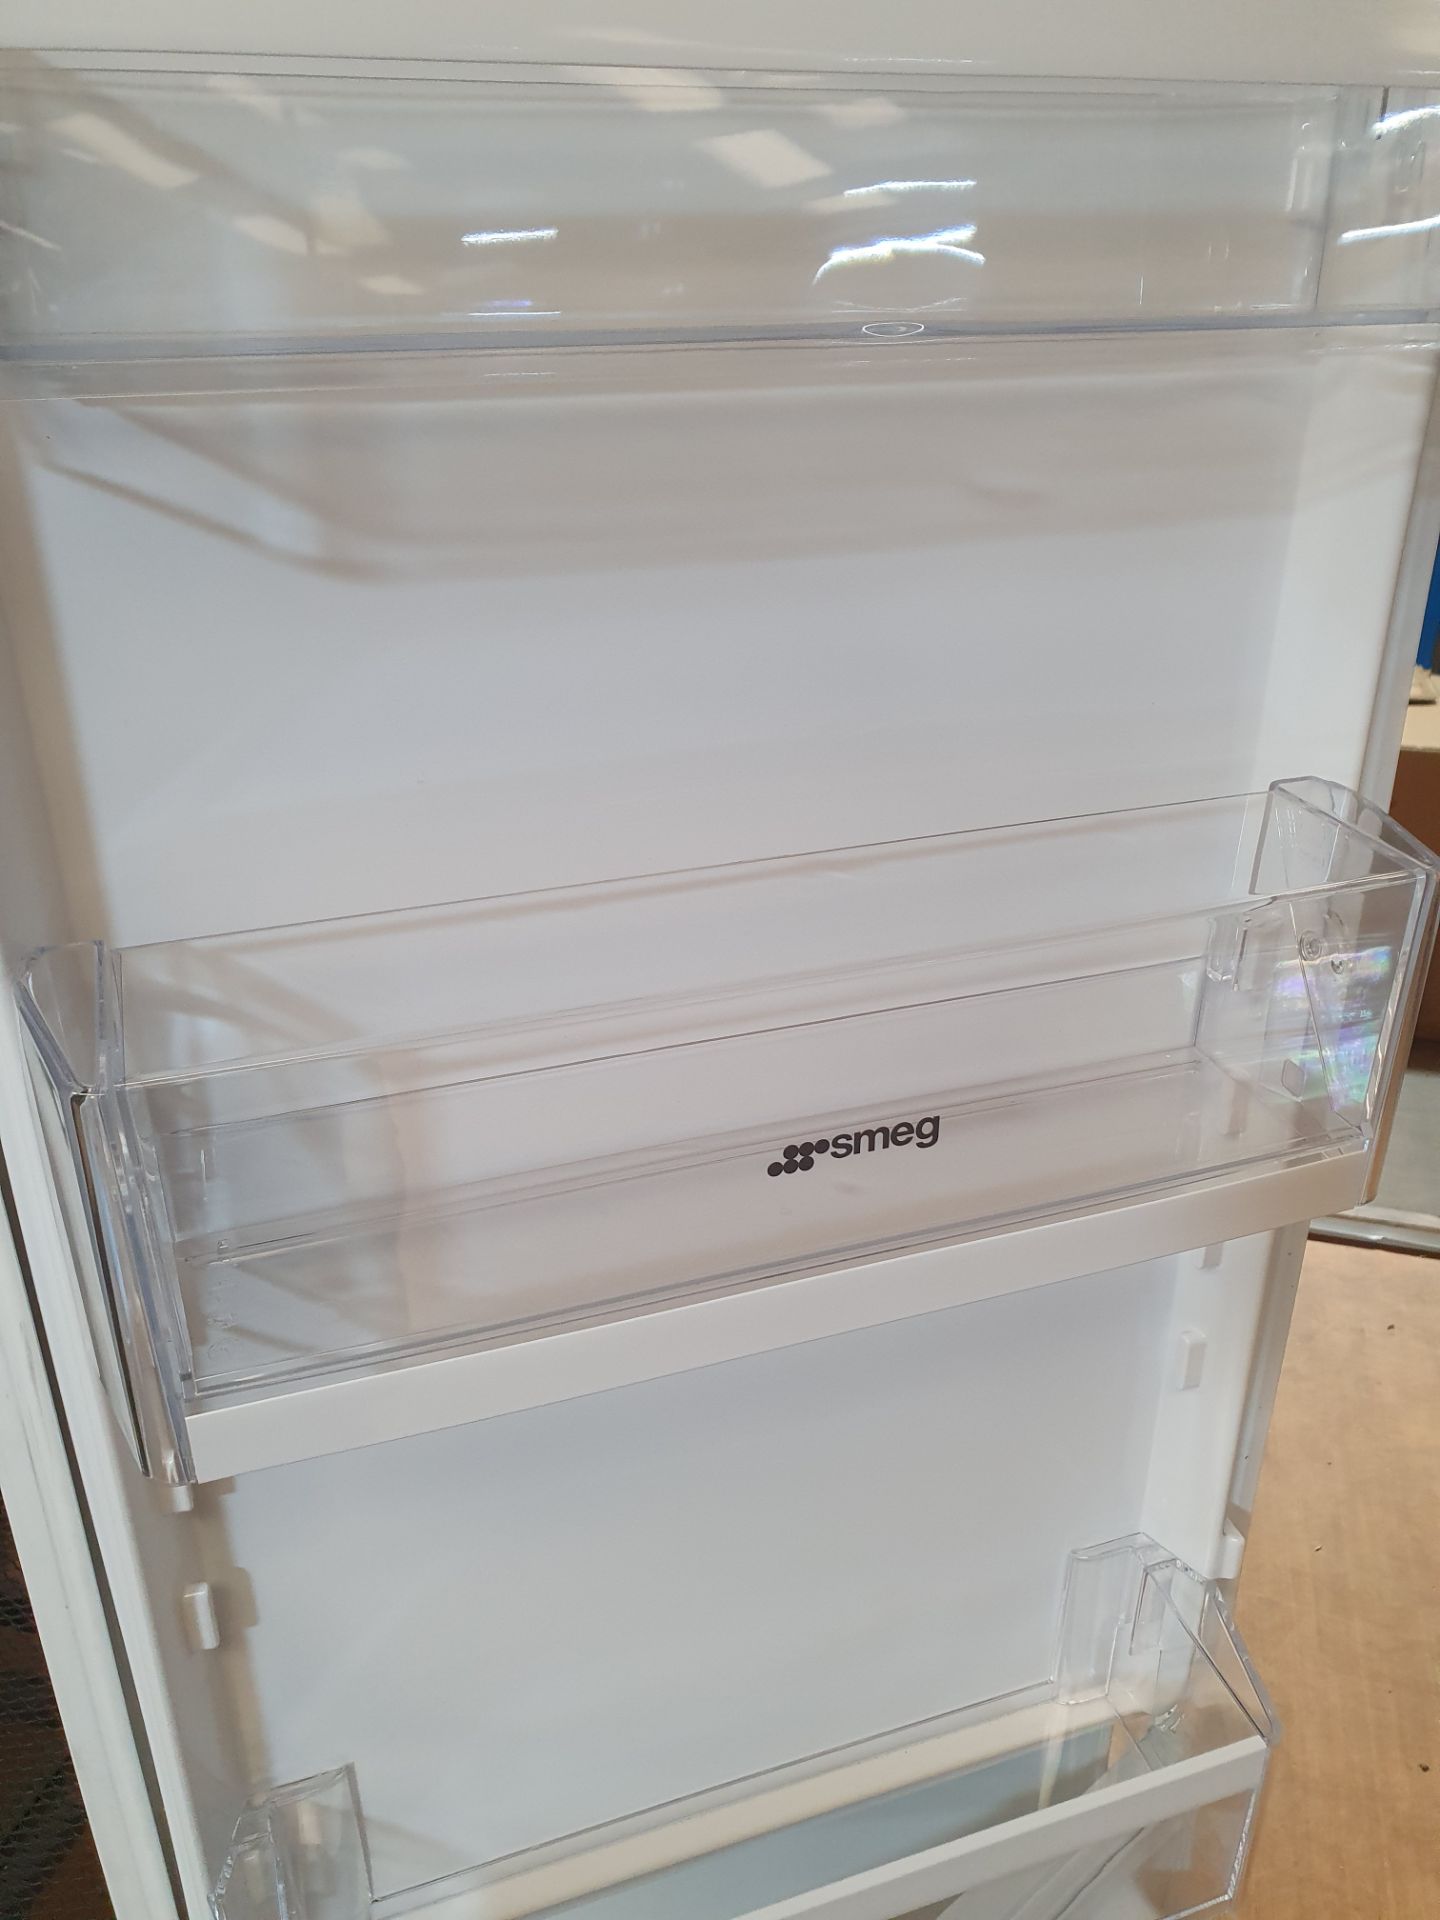 Current Online Price £859. Smeg Universal Built In Right Hinge Refrigerator White UKC4172F - Image 9 of 16